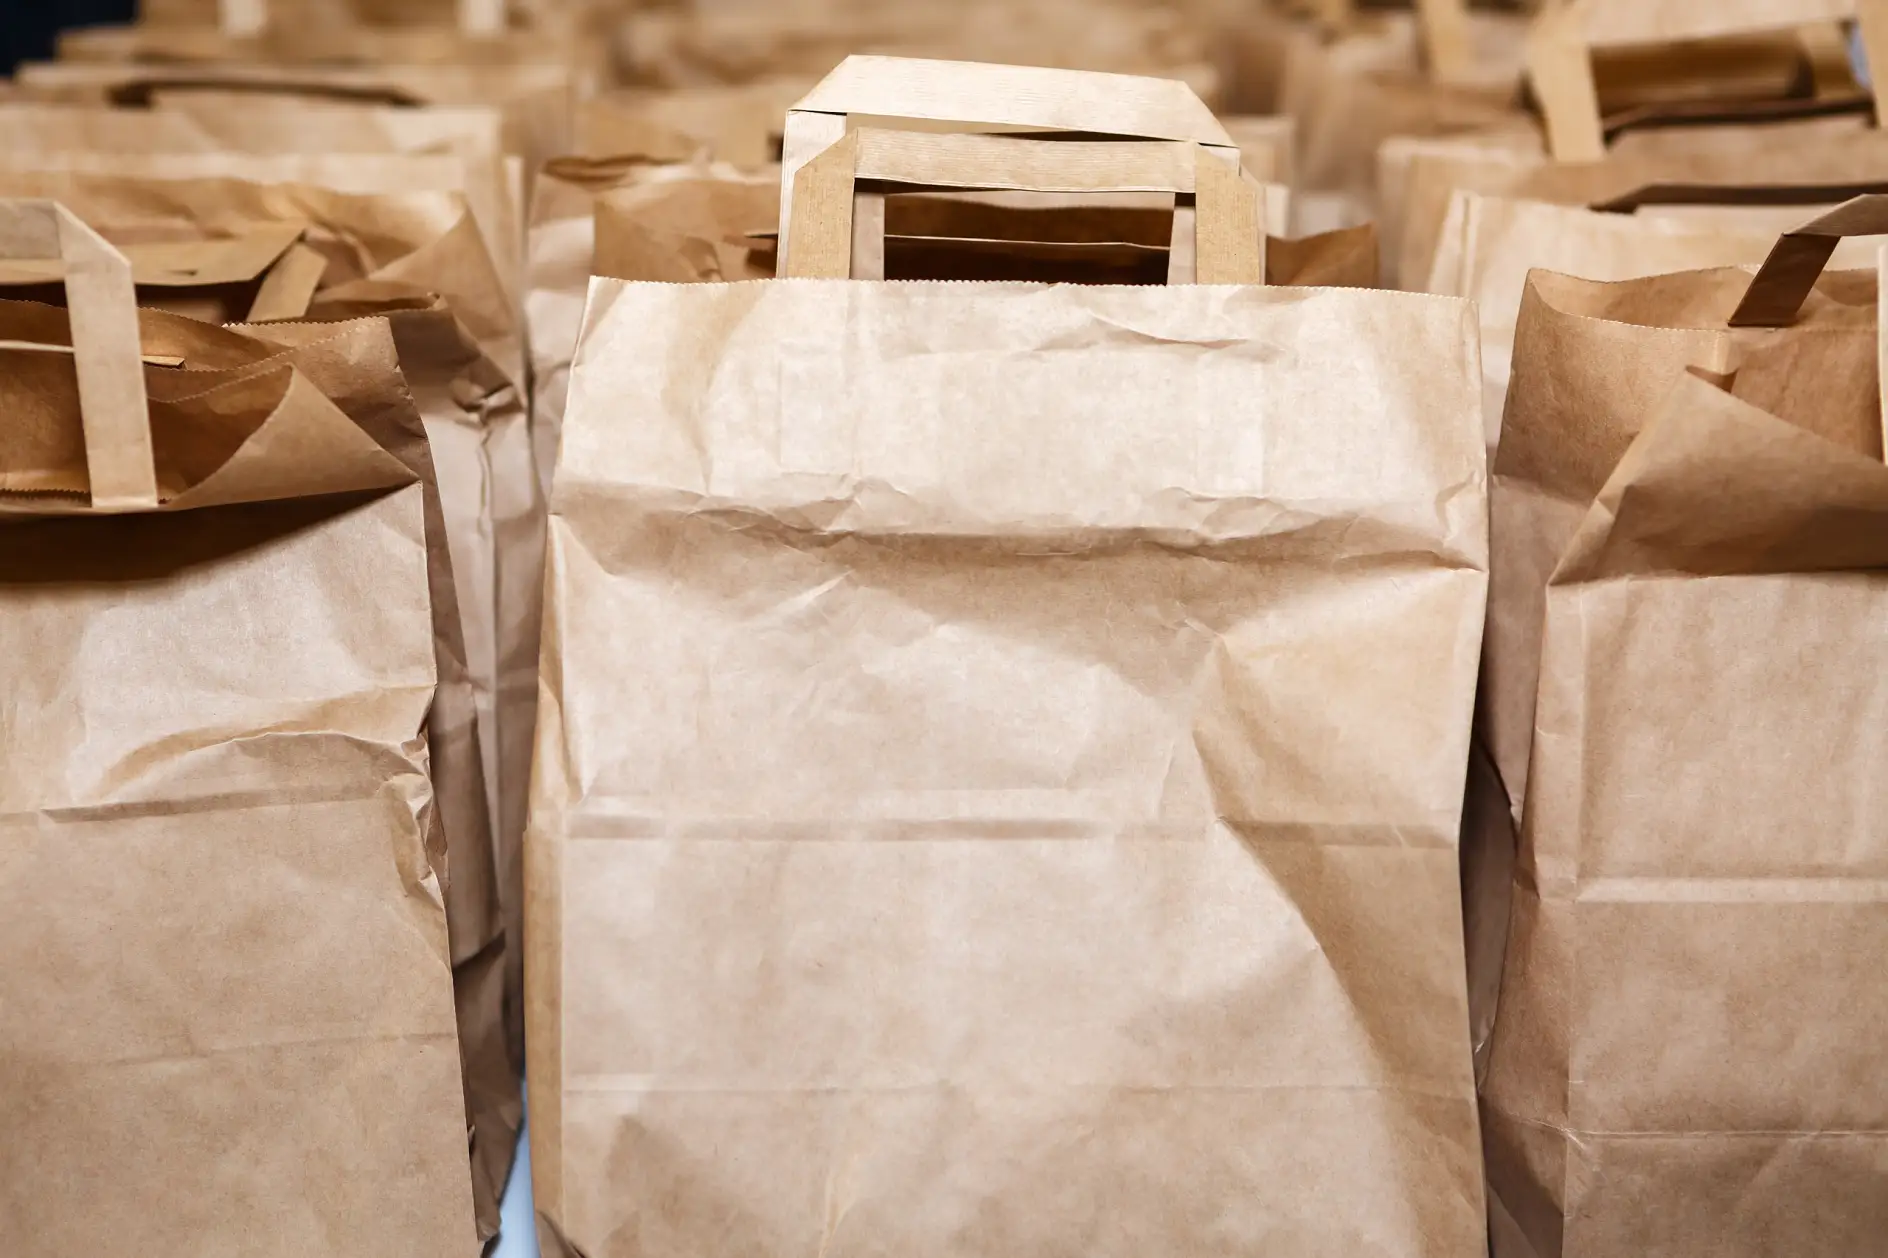 Lots of brown paper bags lined up